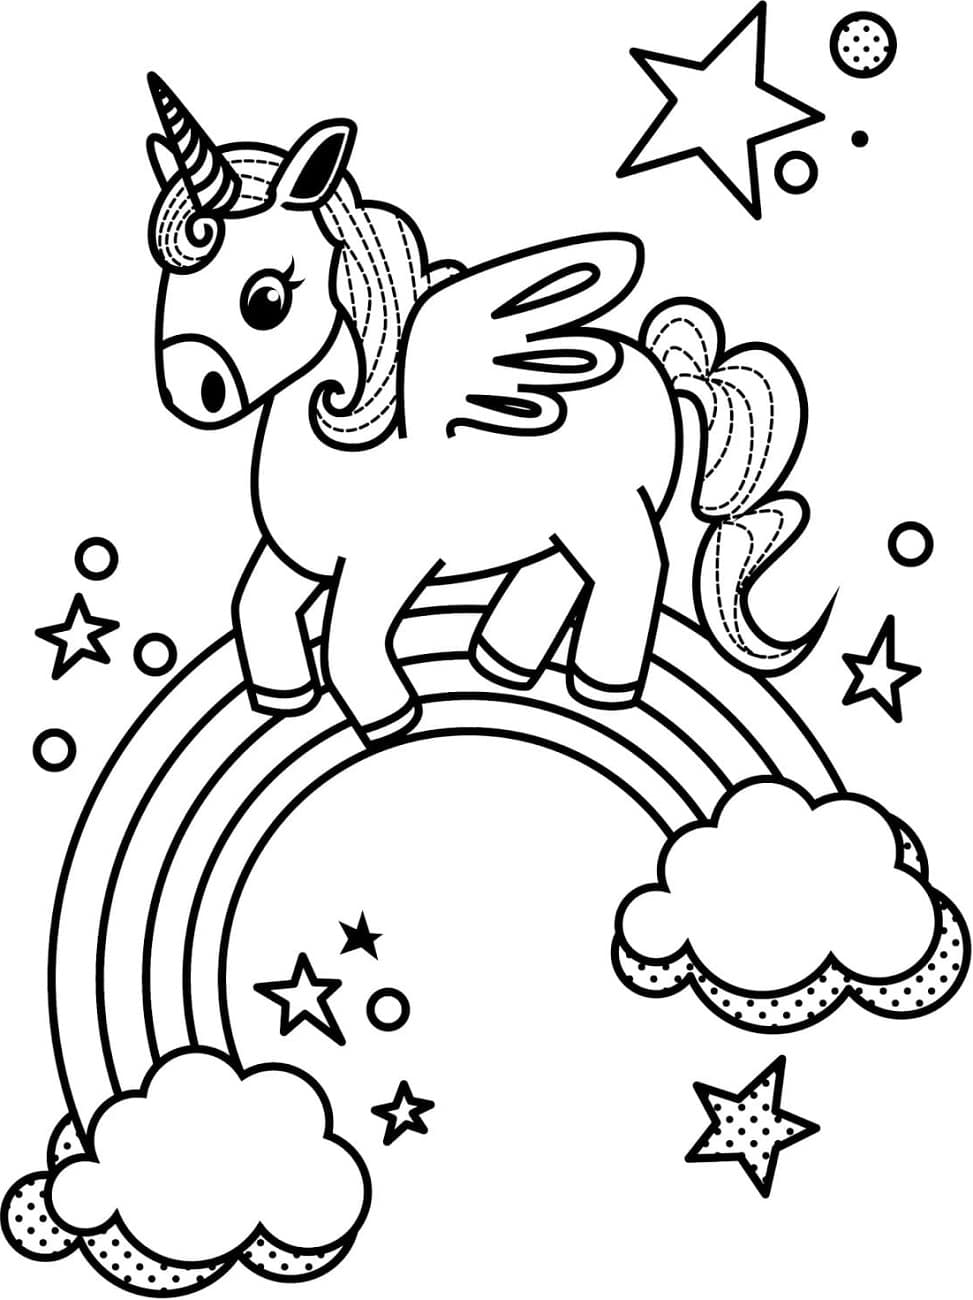 little-unicorn-and-rainbow-coloring-page-free-printable-coloring